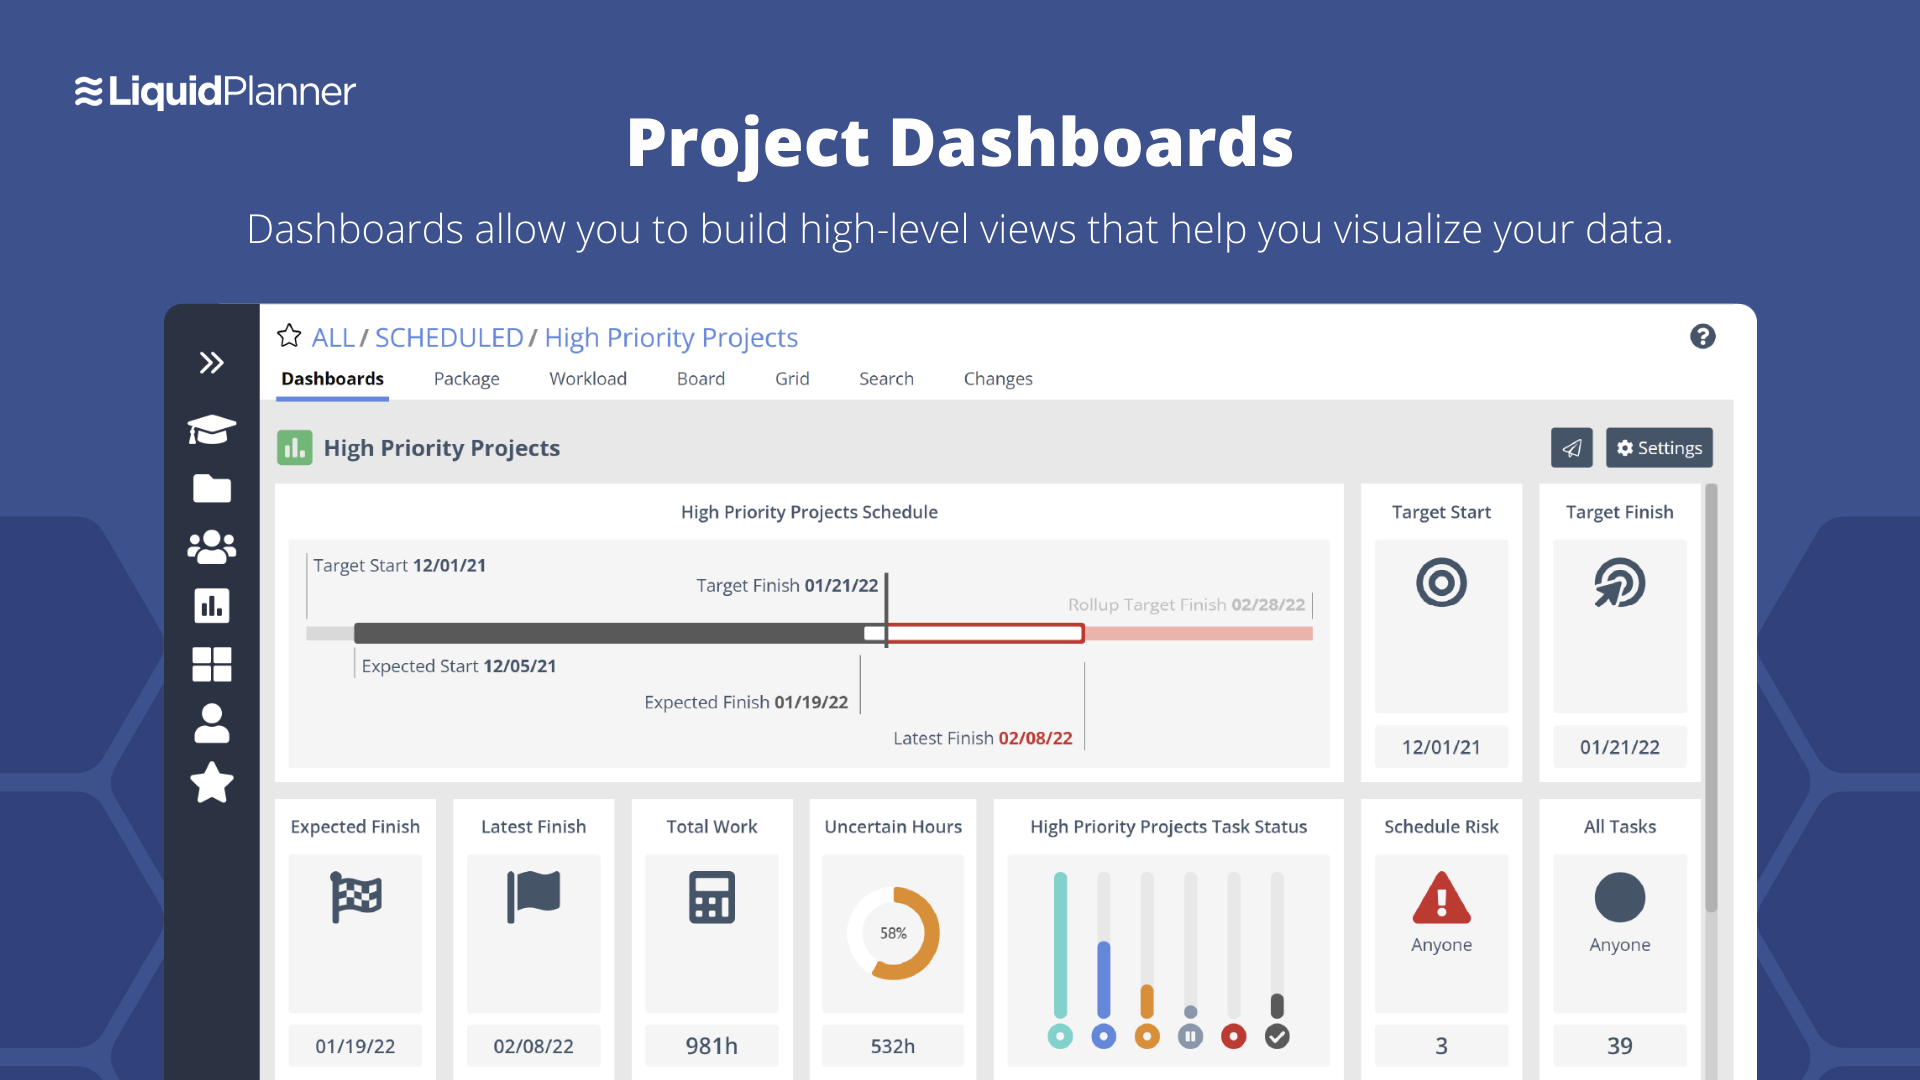 Dashboards provide a high-level summary that allows you to visualize all your projects, tasks, and priorities in one place. Here is where you can see if you're at risk of missing project deadlines across the portfolio of projects. 